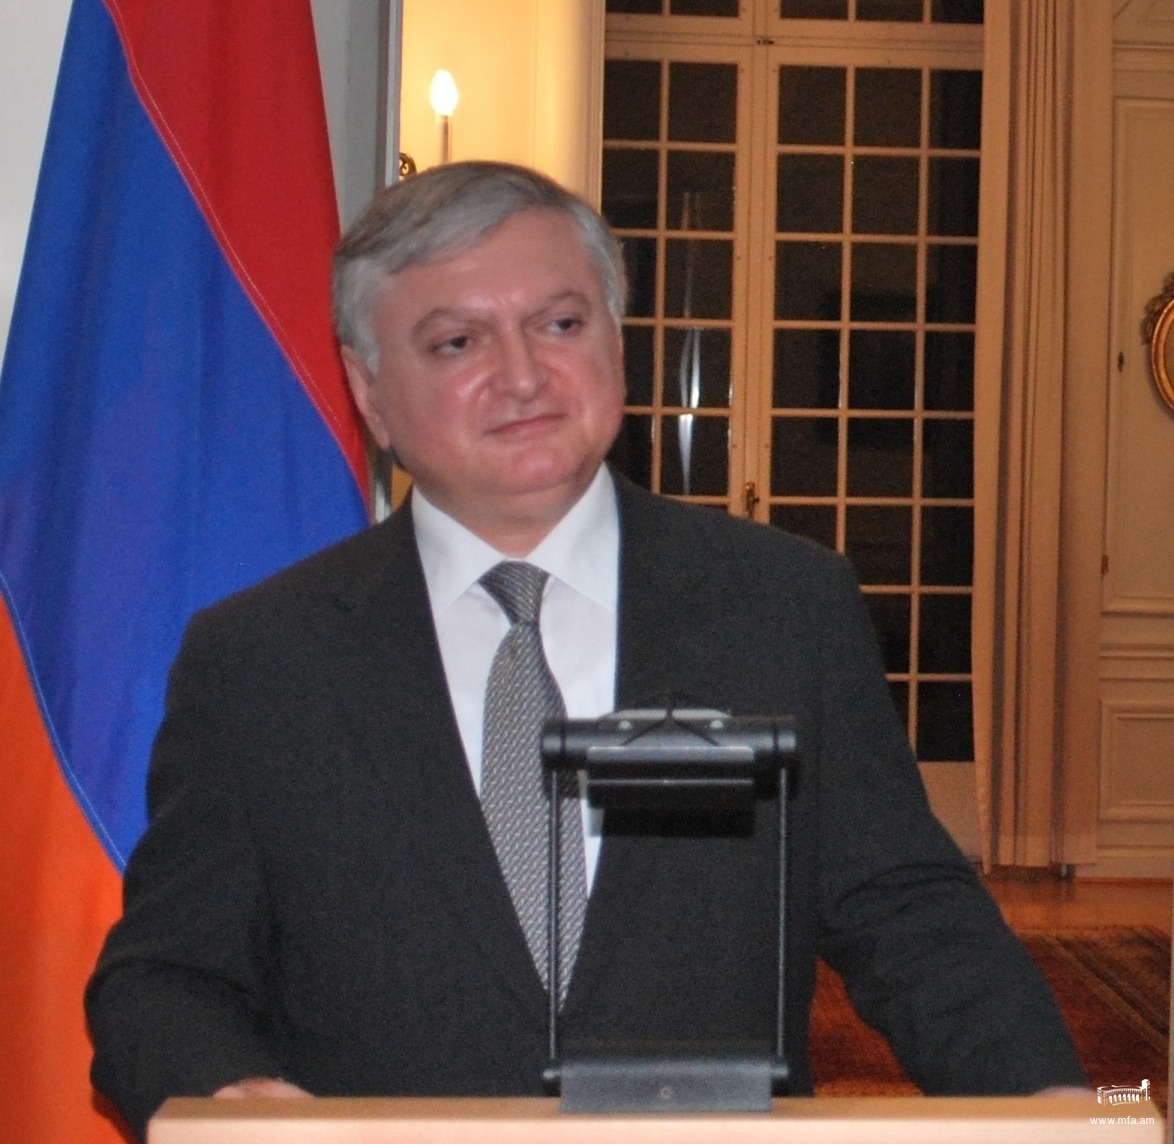 Statement of Foreign Minister of Armenia Edward Nalbandian on the recognition of the Armenian Genocide by the Latin American Parliament